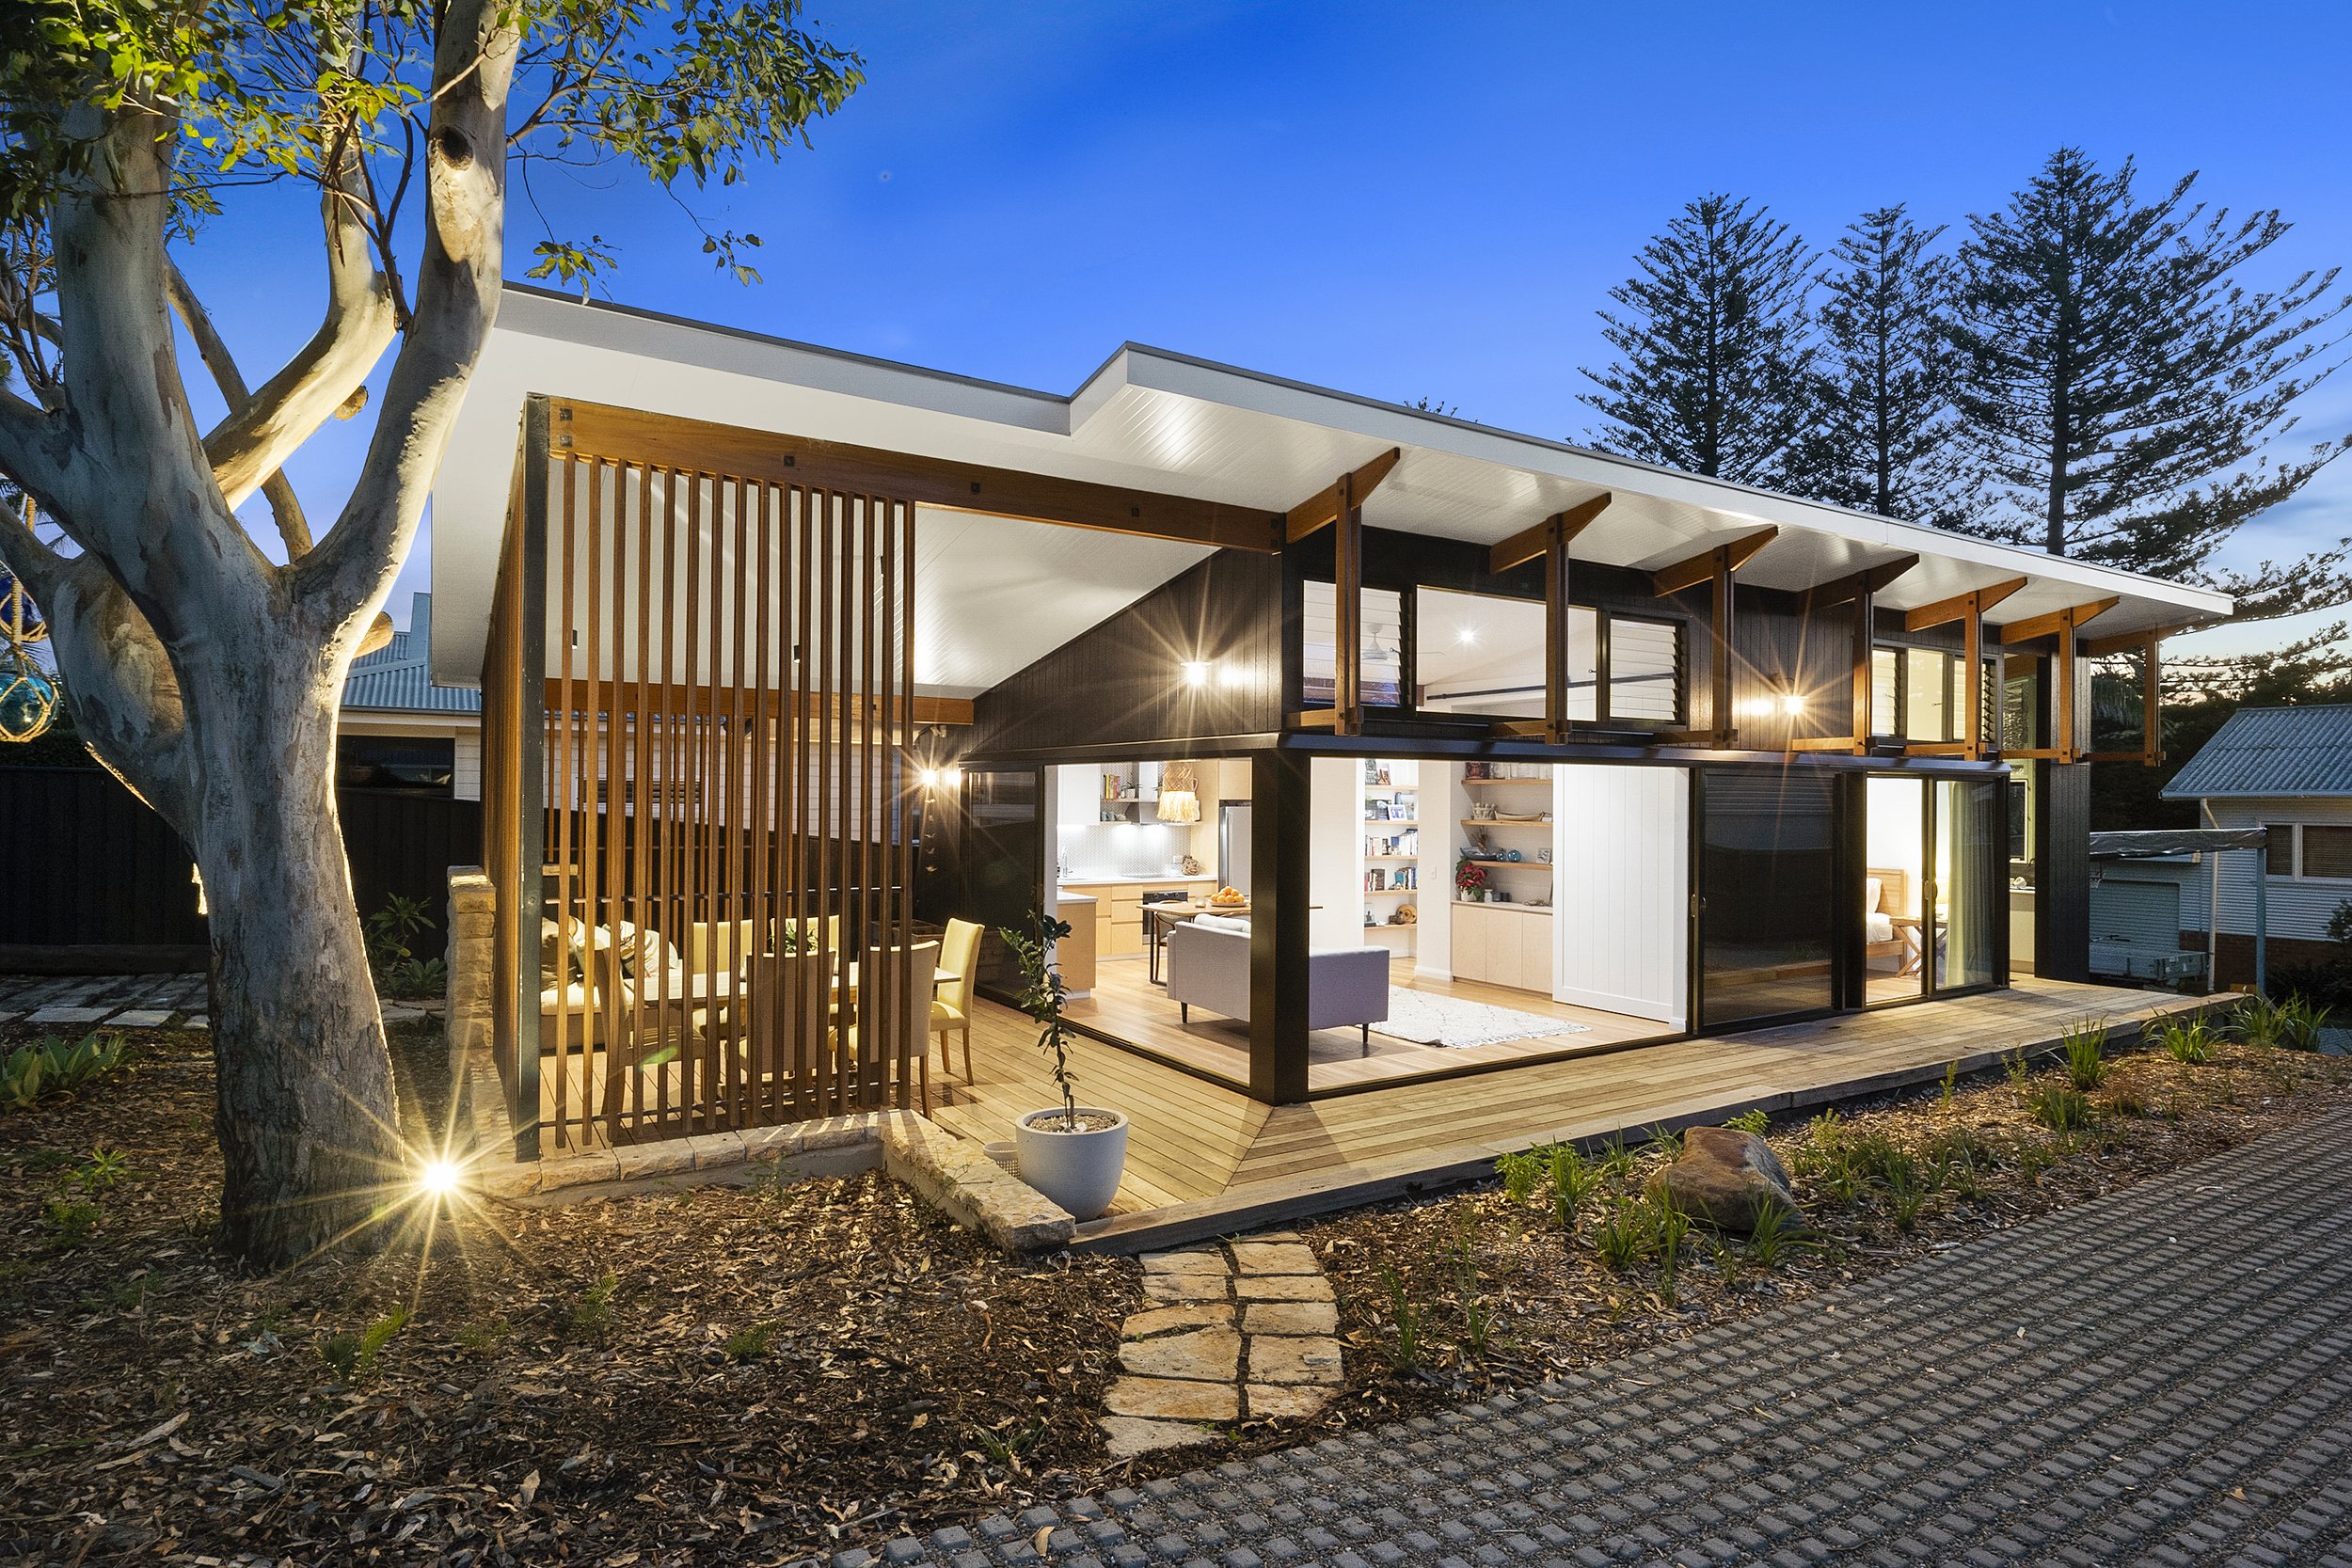 Granny Flat Six: Smartly Designed 1 Bedroom Flat in NSW